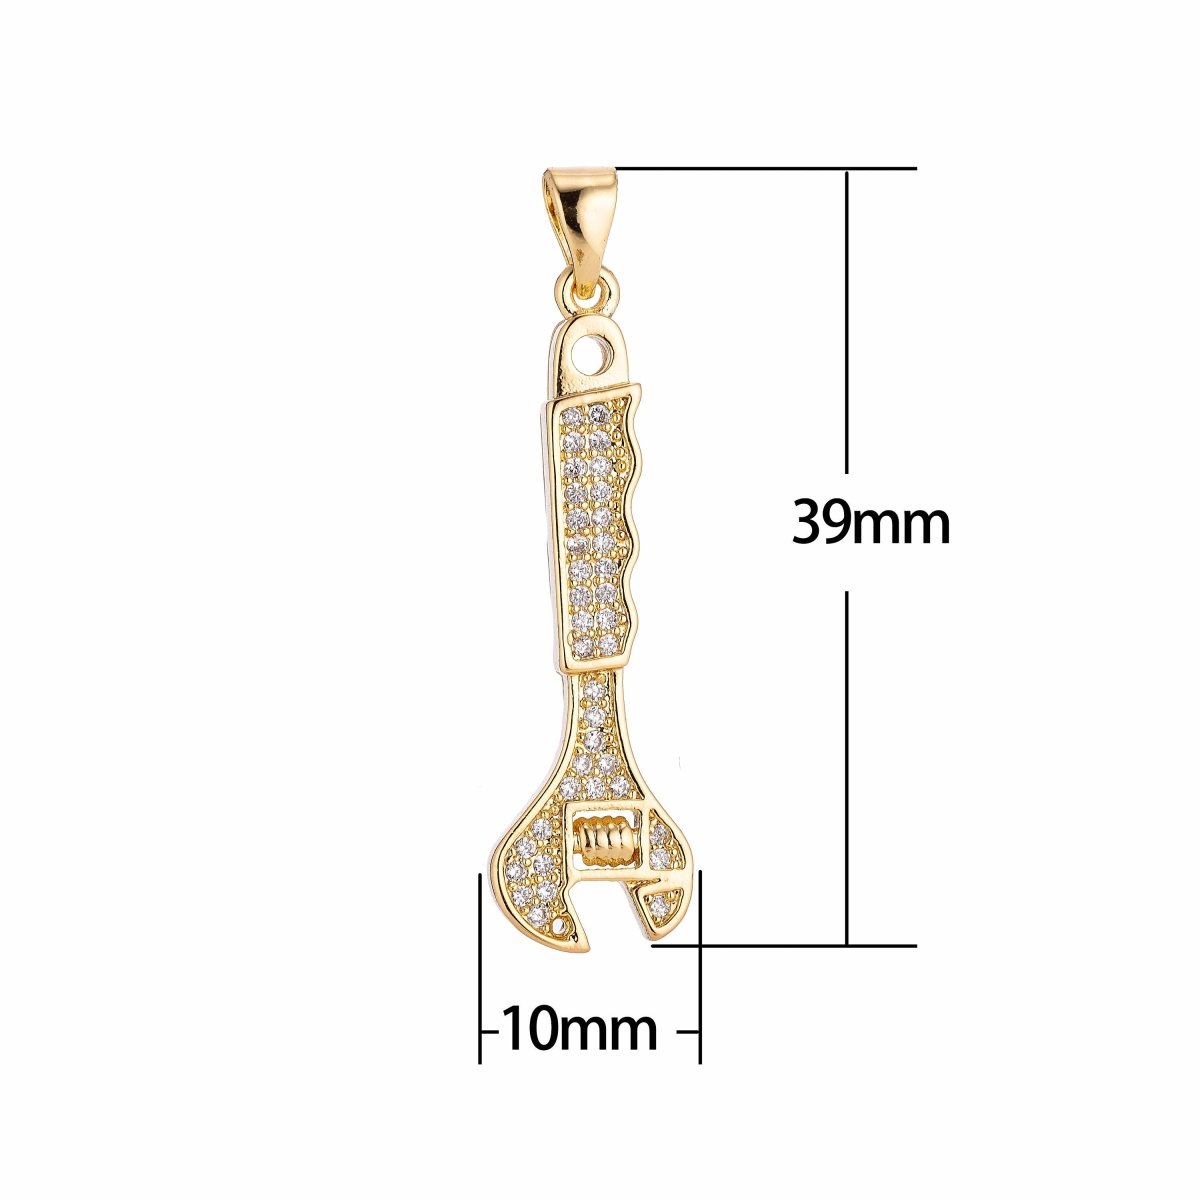 24K Gold Filled Wrenches Tools Pendant Charm with Cubic Zircon (CZ) Rhinestone for DIY Bails Findings for Jewelry Making Supplies H-194 - DLUXCA